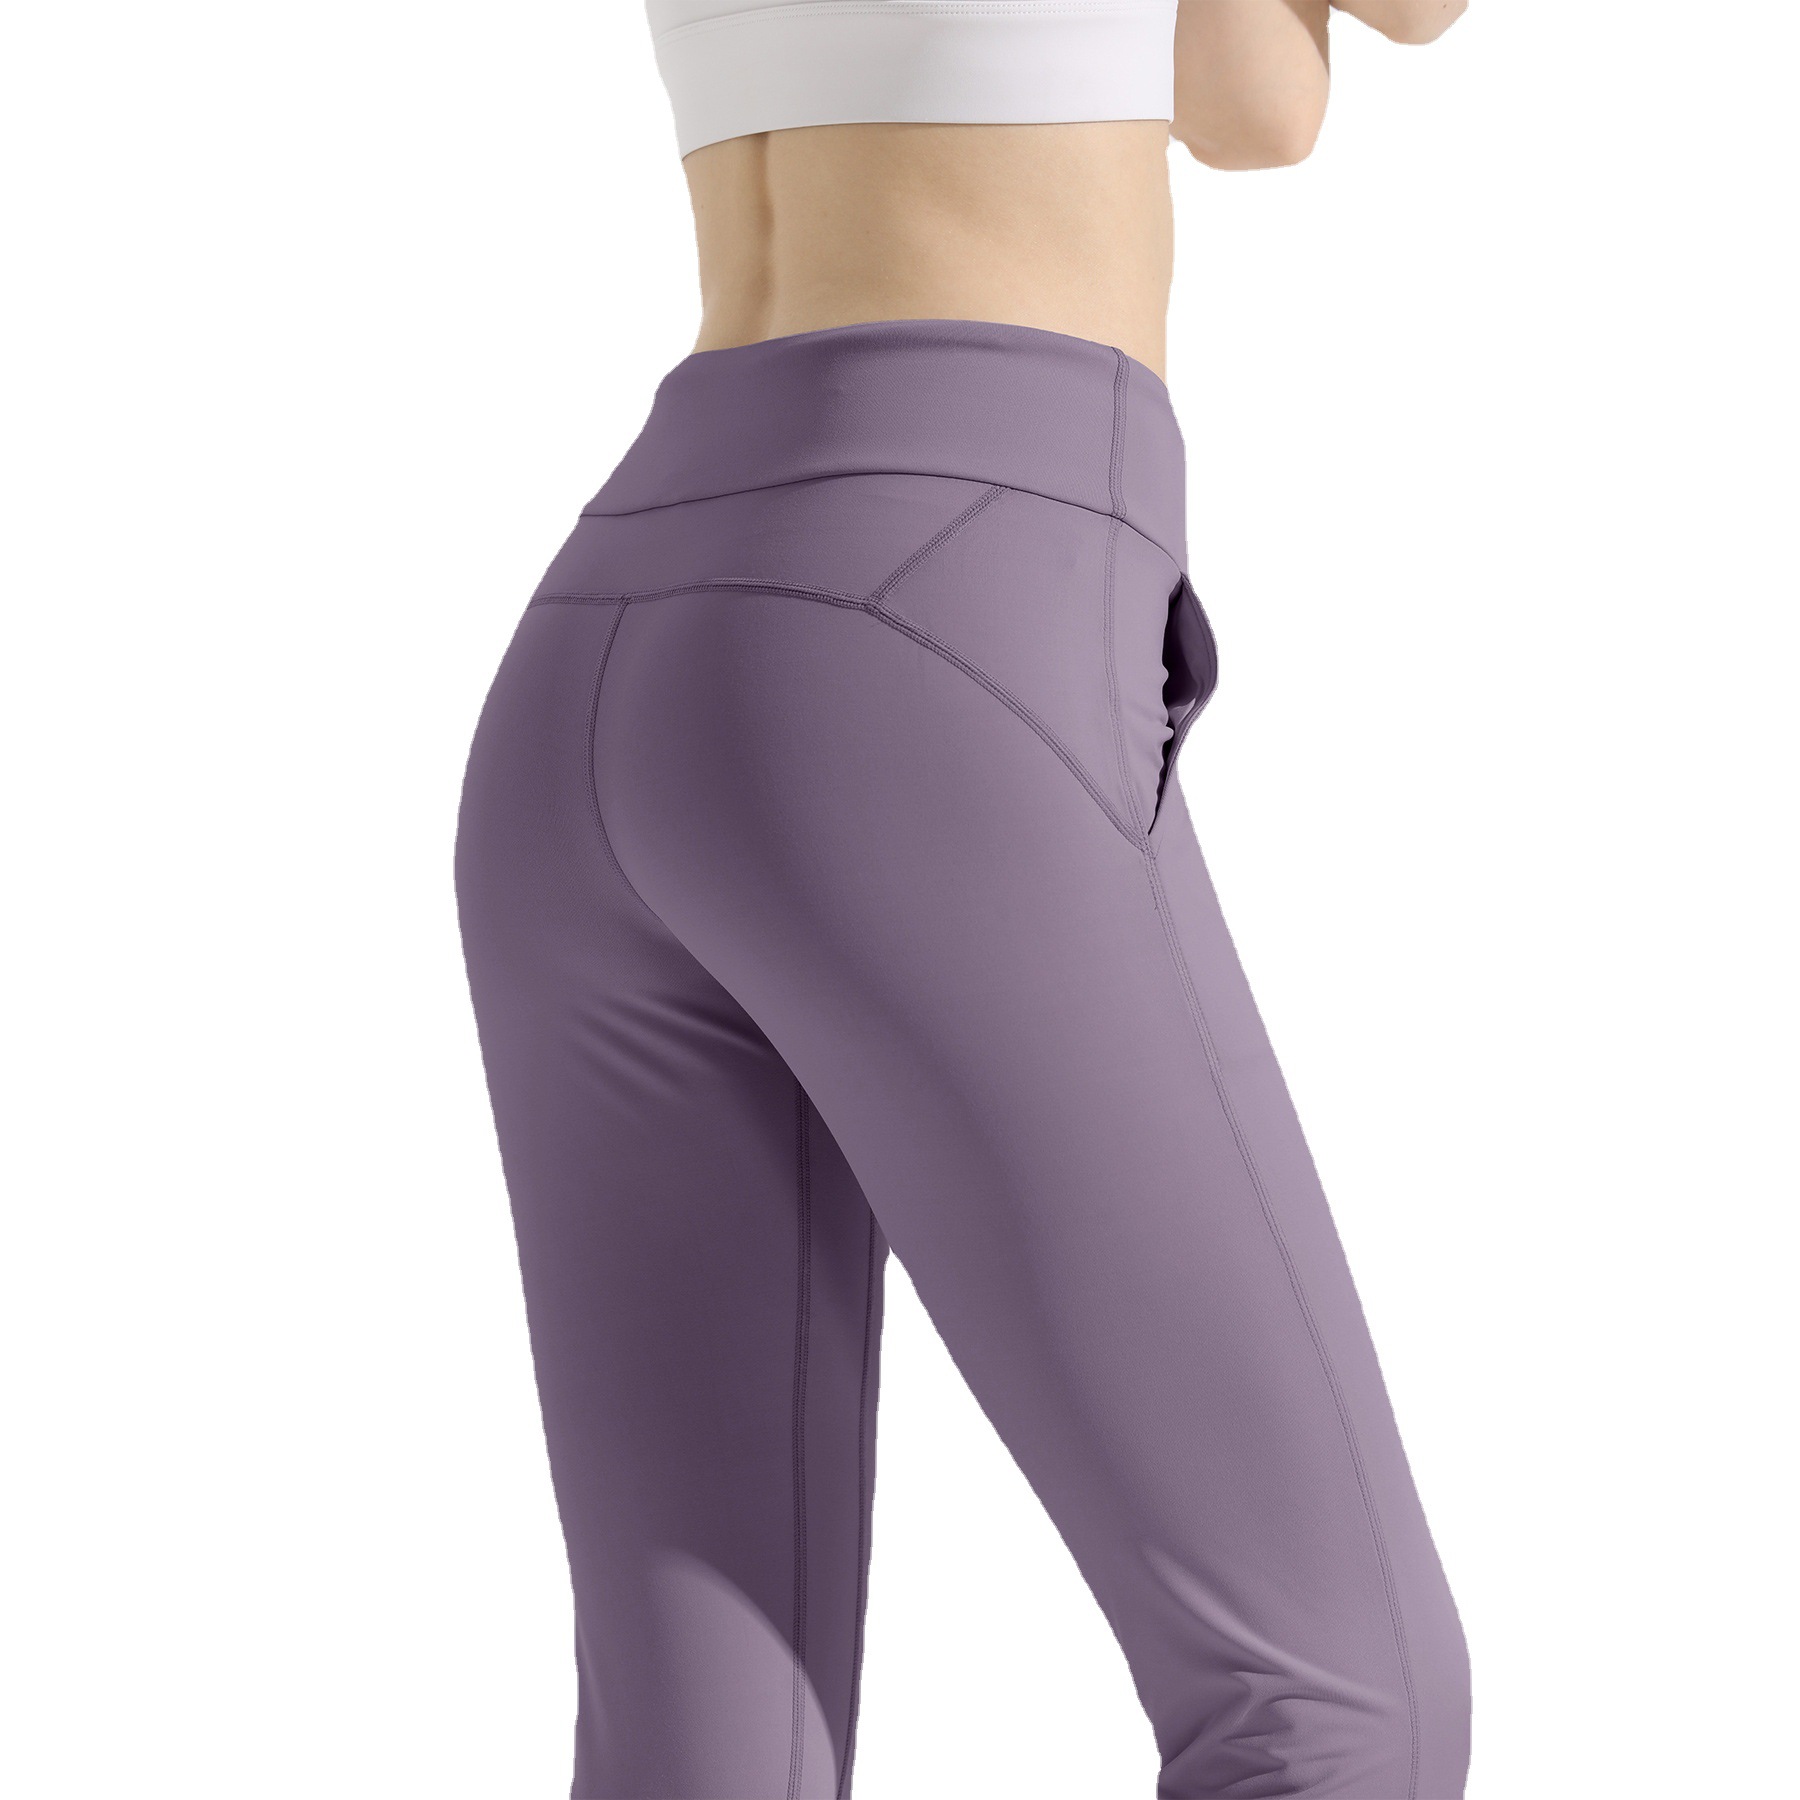 New Wholesale Gym Clothes Workout Sportswear Tight Trousers Pants High Waist Fitness Yoga Running Leggings Women